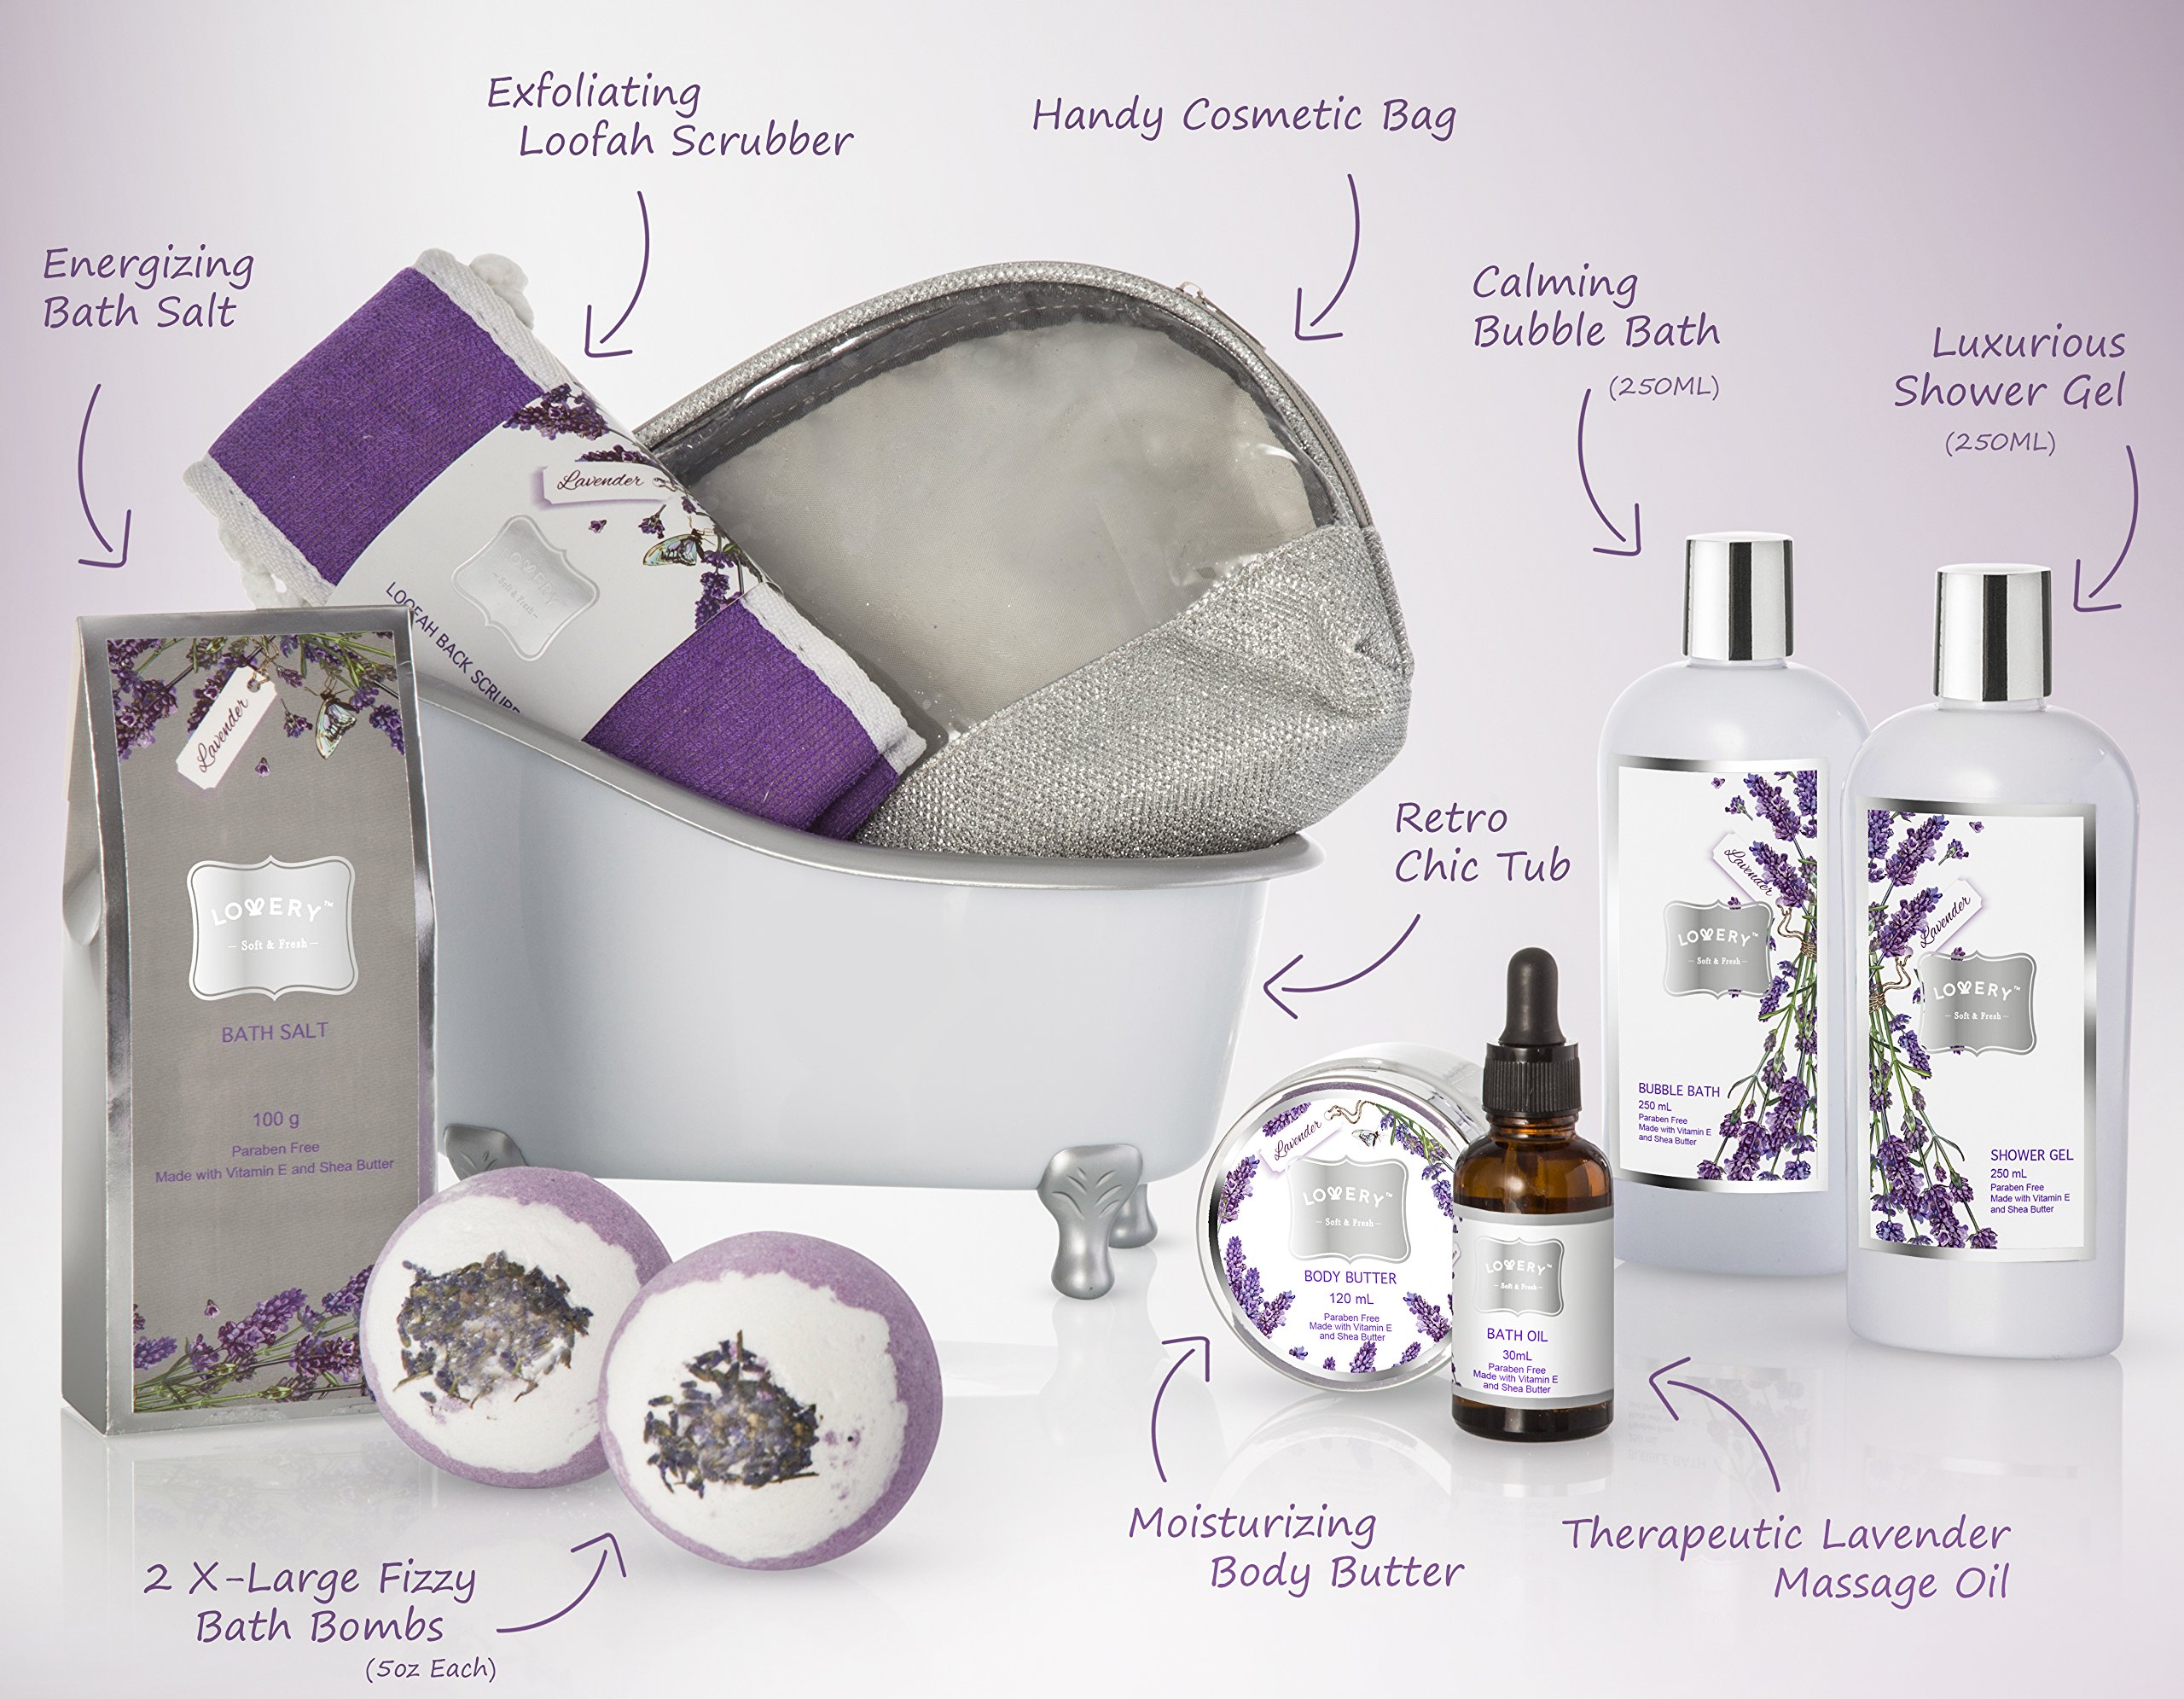 Bath Gift Basket Set for Women: Relaxing at Home Spa Kit Scented - Lavender and Jasmine with Large Bath Bombs, Salts, Shower Gel, Body Butter Lotion, Bath Oil, Bubble Bath, Loofah & More